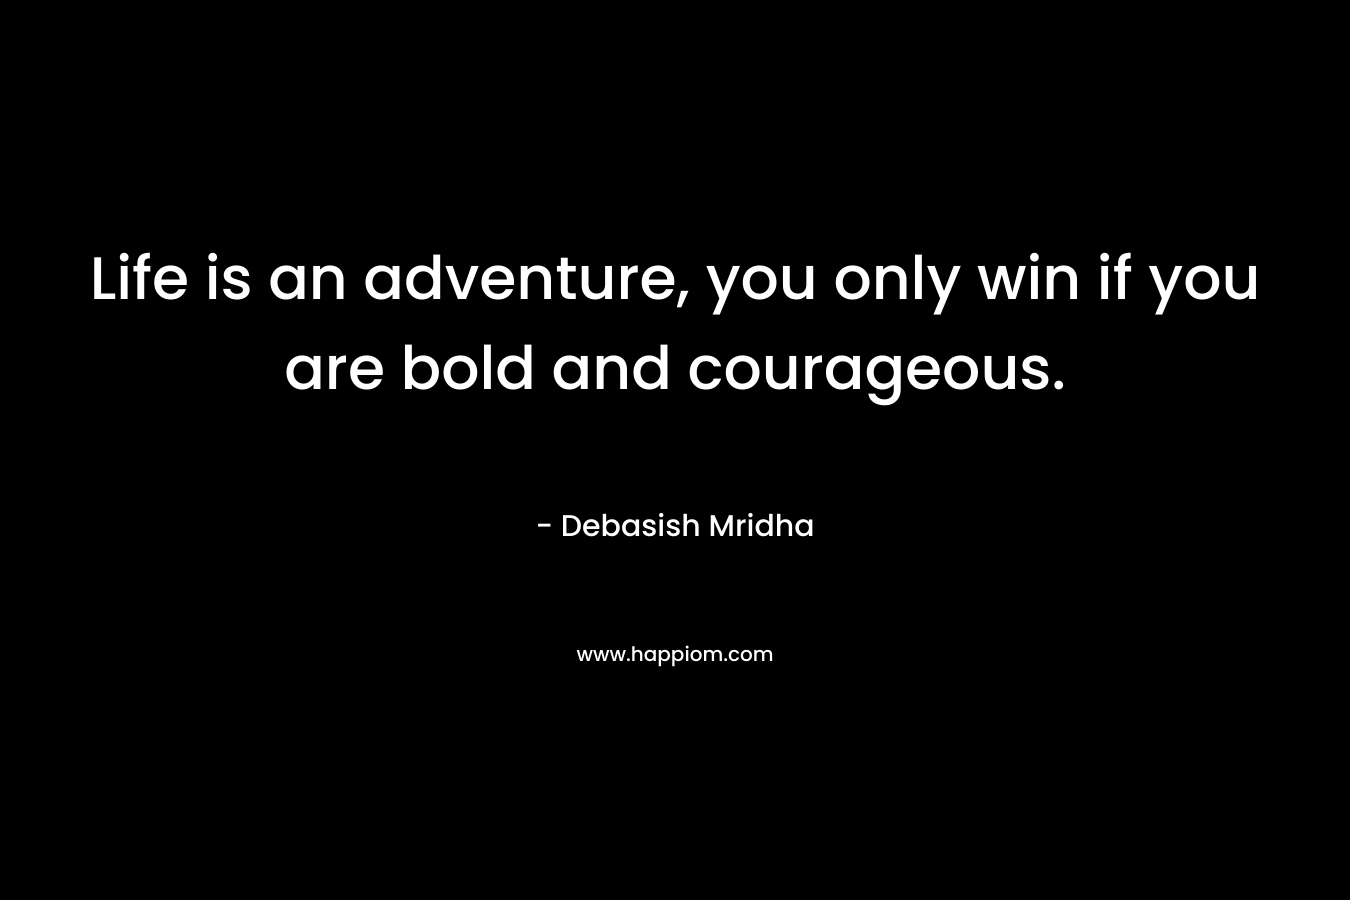 Life is an adventure, you only win if you are bold and courageous.